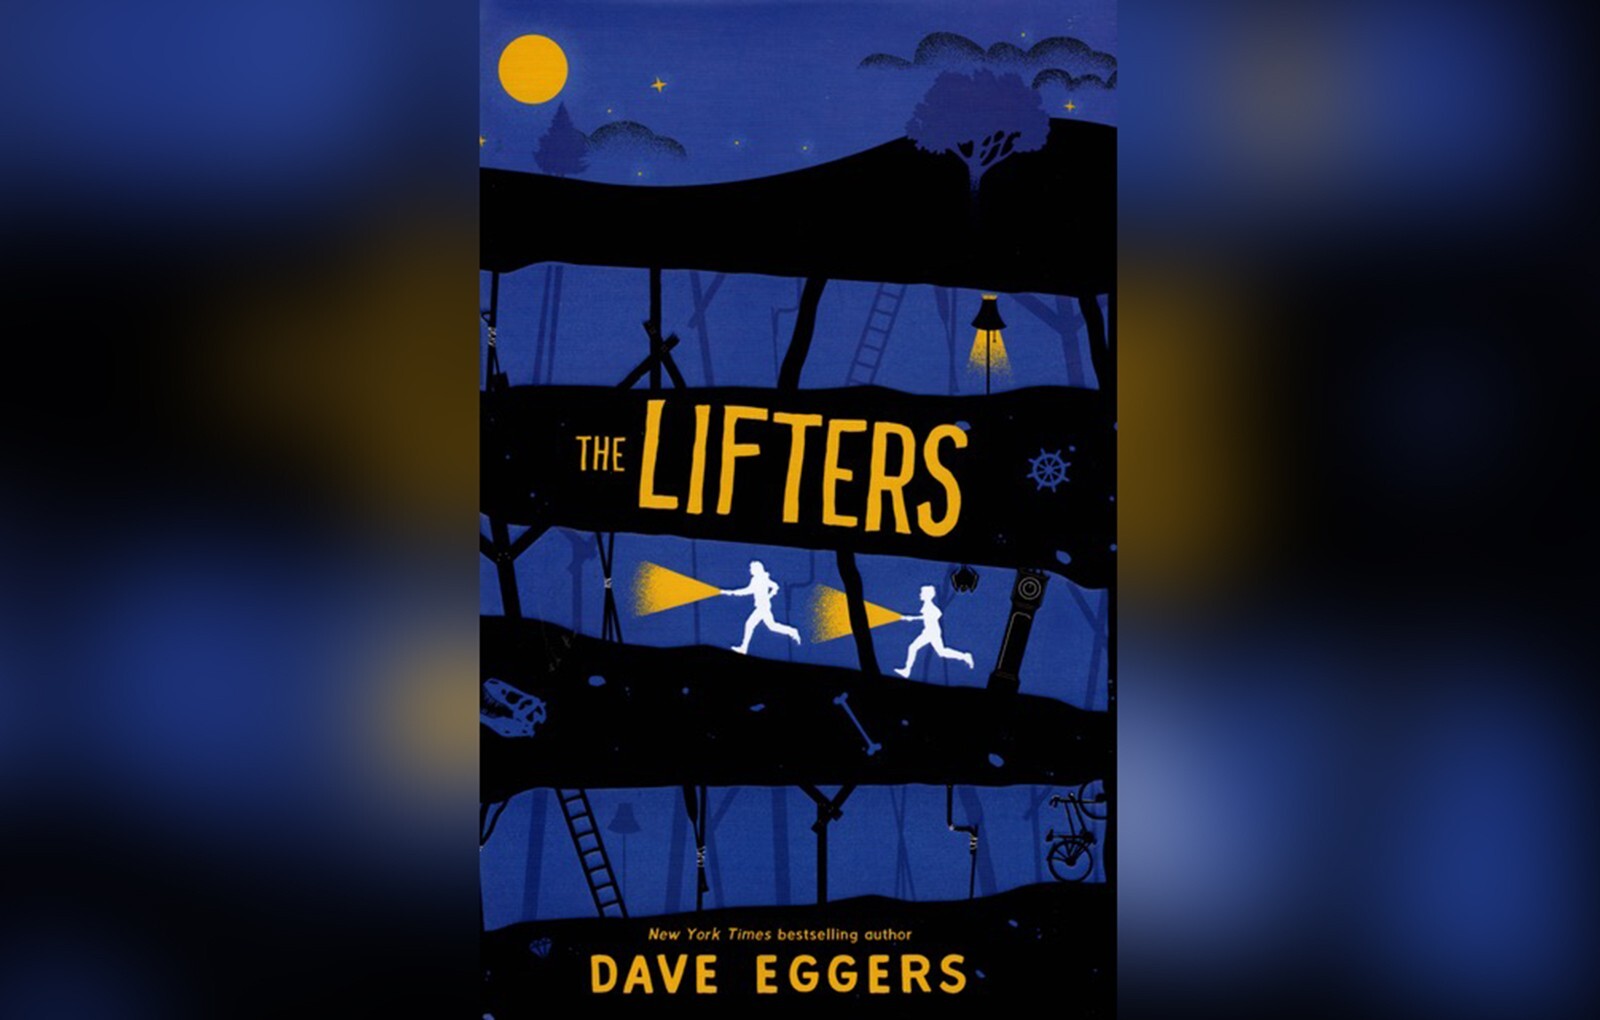 'The Lifters' is an entertaining mix of fantasy and real life from award-winning writer Dave Eggers.